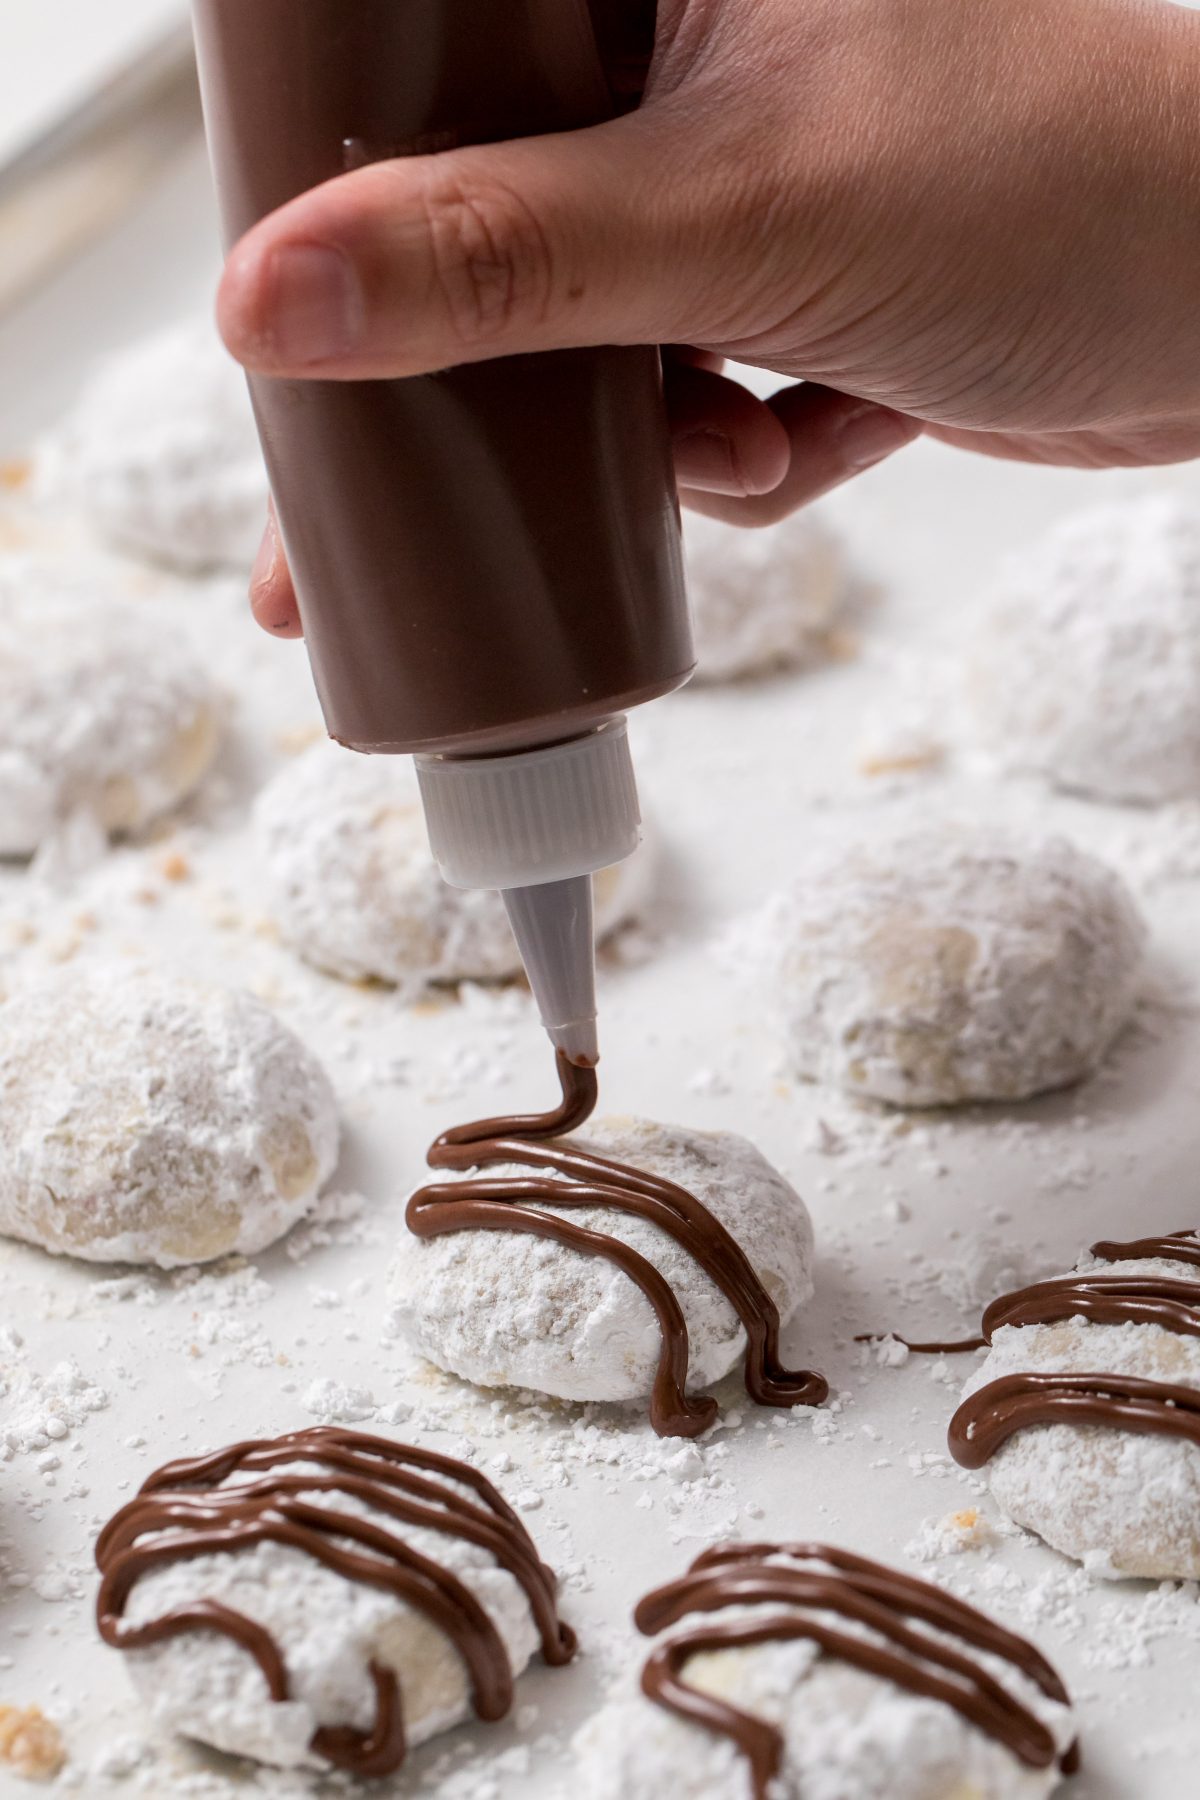 5D4B5472 - Chocolate Covered Snowball Peppermint Cookies - Make the chocolate drizzle